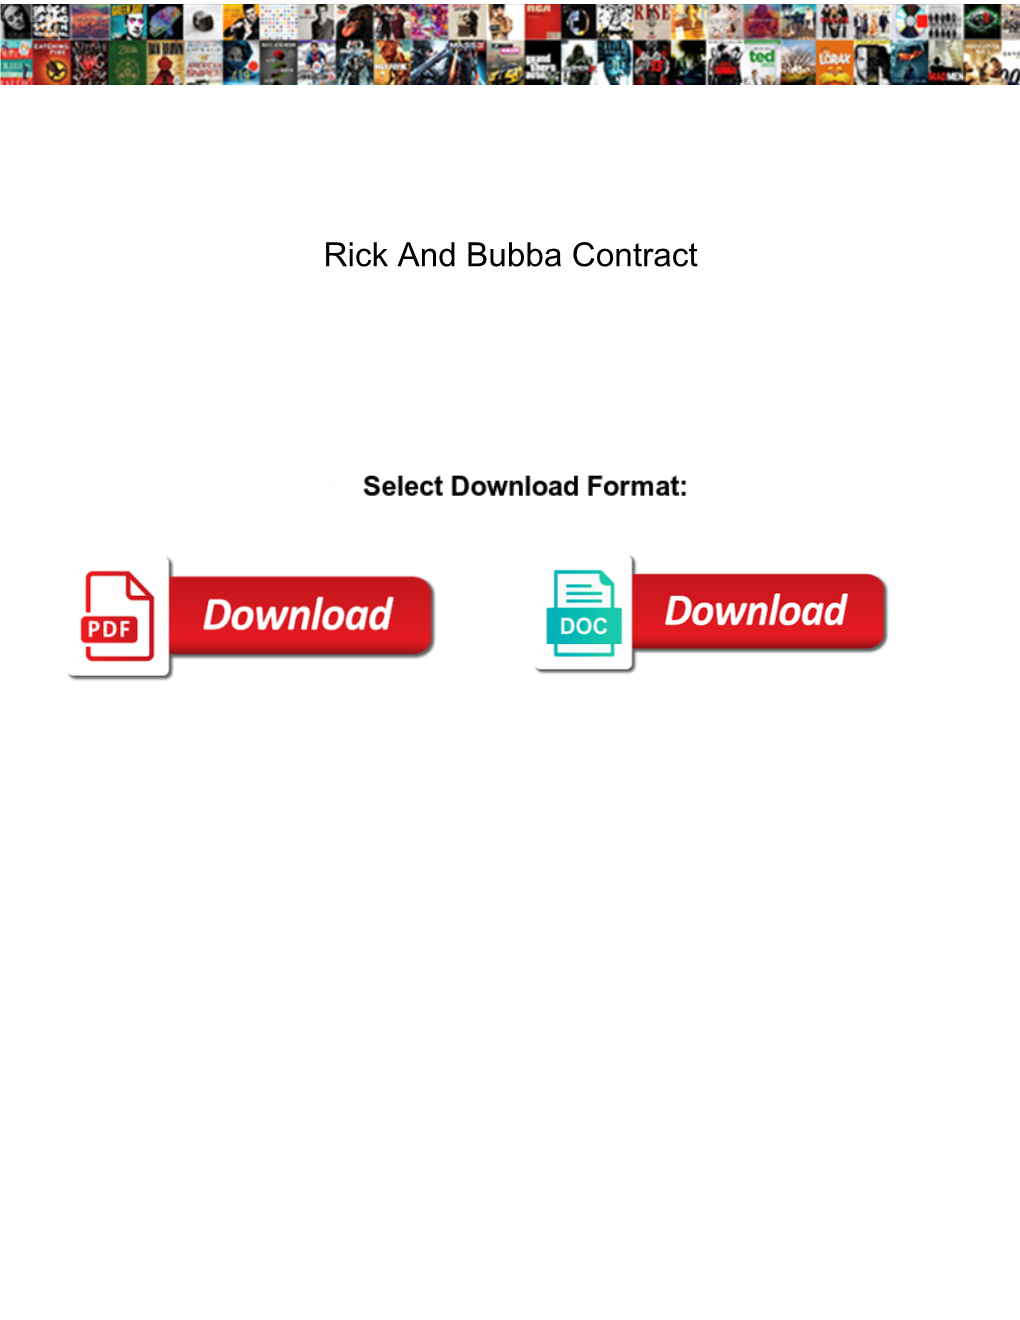 Rick and Bubba Contract